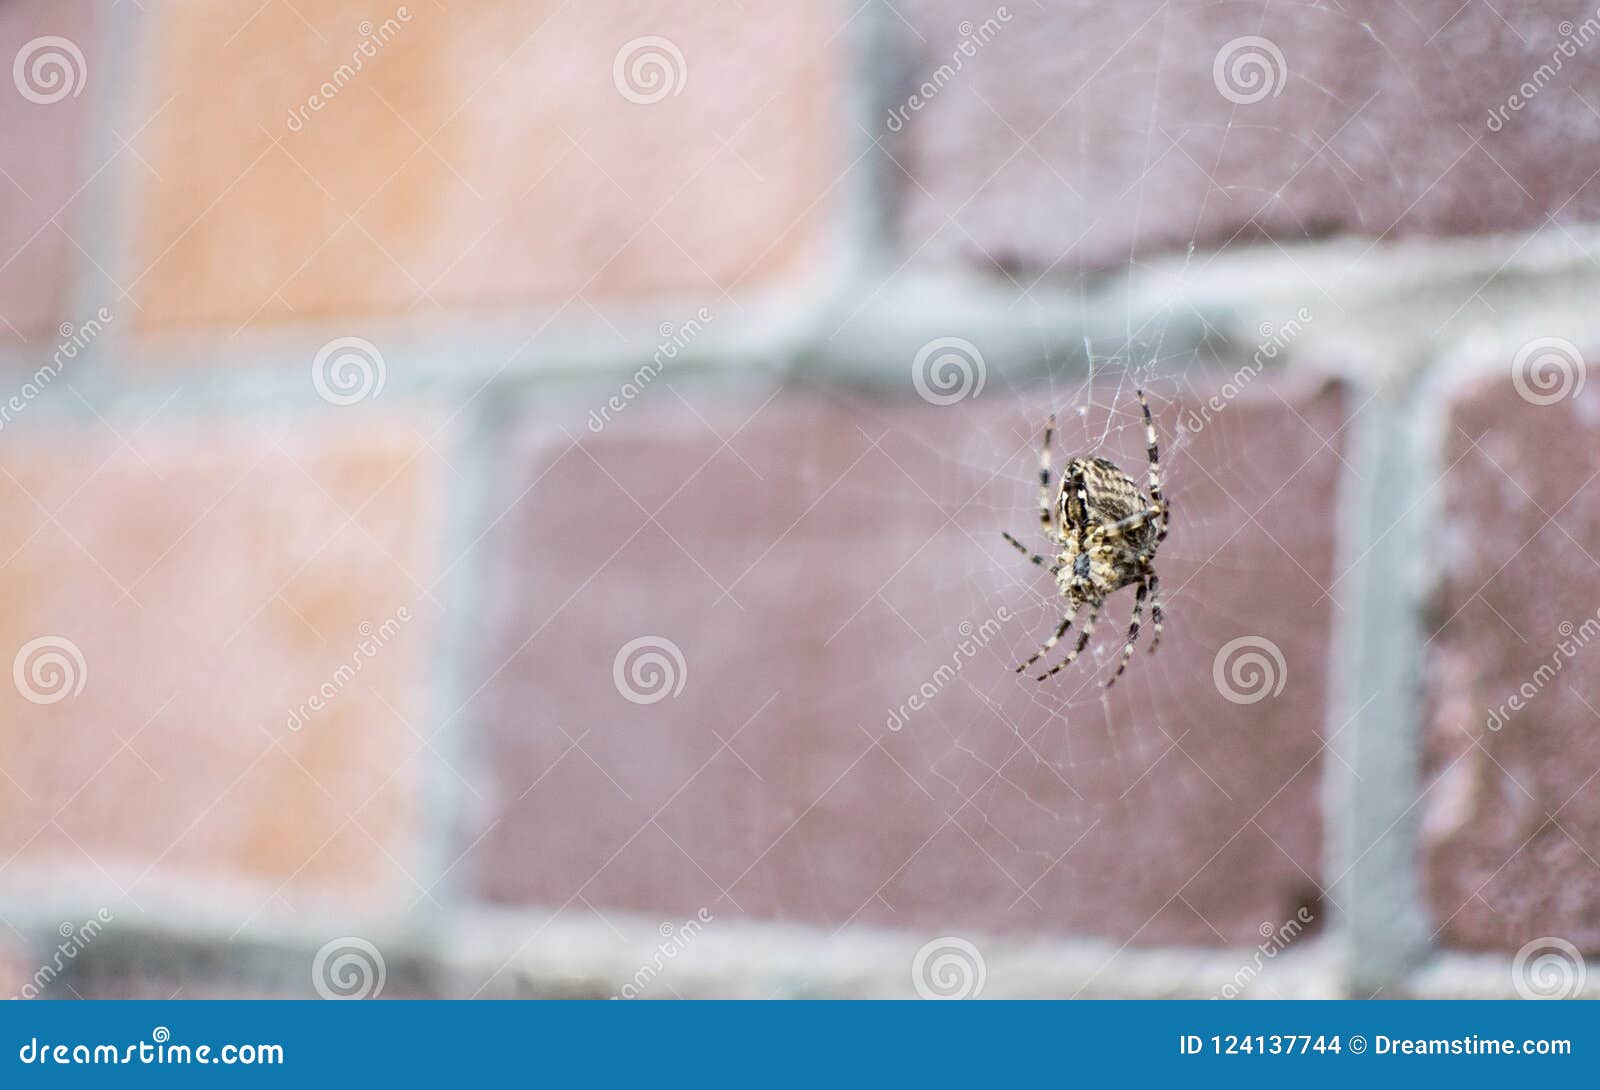 Spider Hanging Out On His Web Stock Photo - Image of wall, spider: 124137744 How To Hang Spiders On Brick House